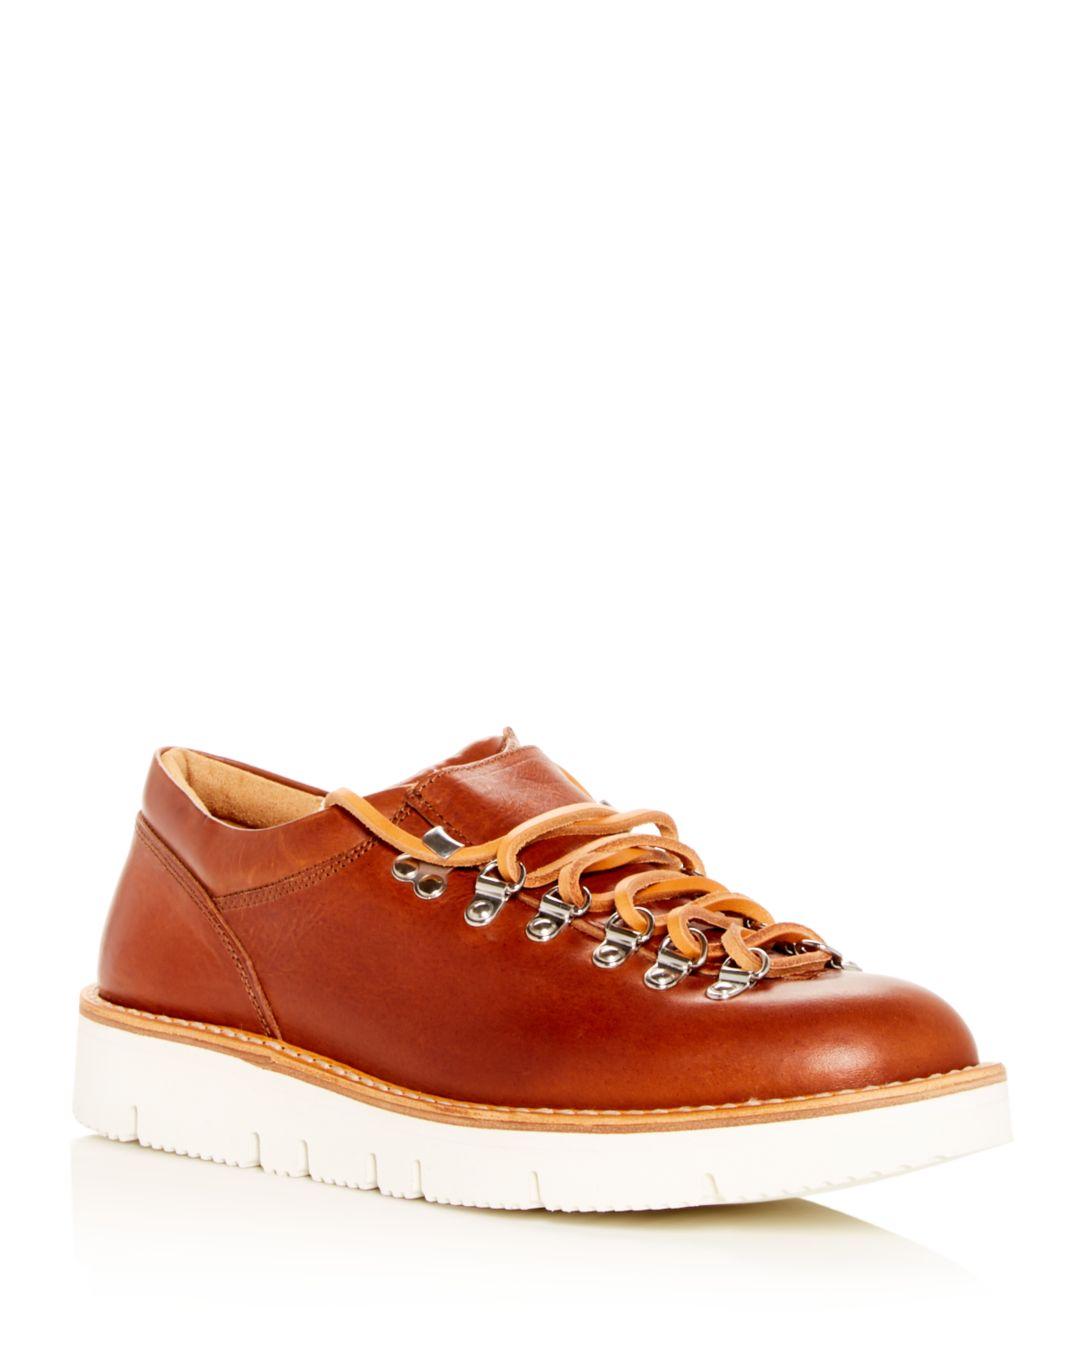 Fracap Men's Leather Low - Top Boots in Brown for Men - Lyst